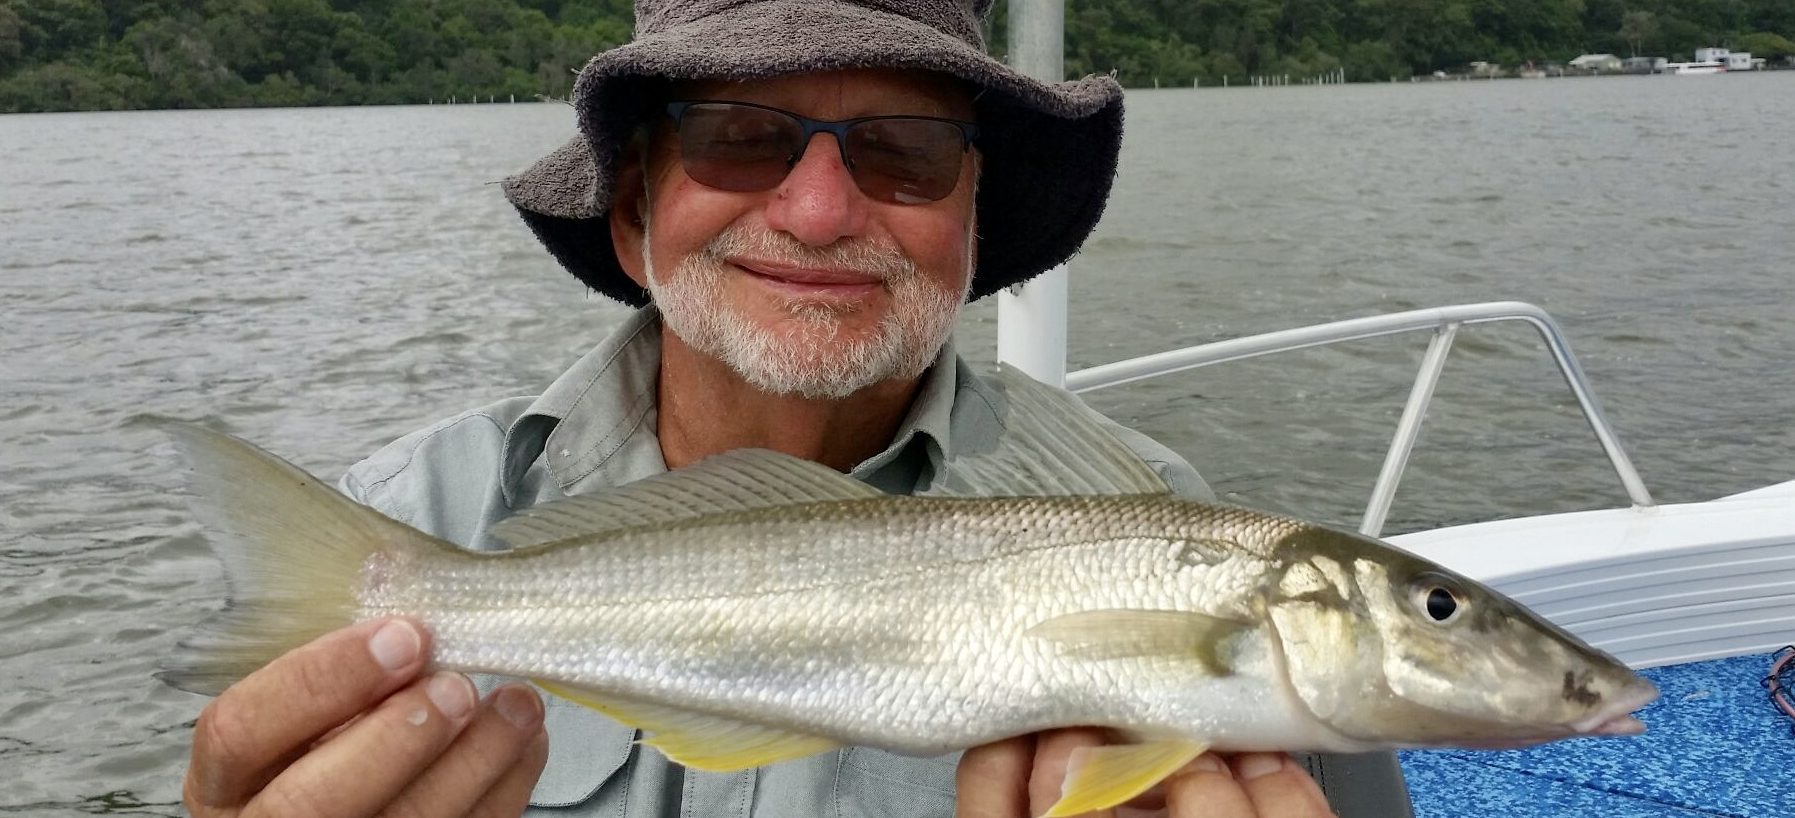 Jim with a Thumper 42 cm Whiting caught on the Tweed River with Brad Smith Fishing Charters e1583989653510